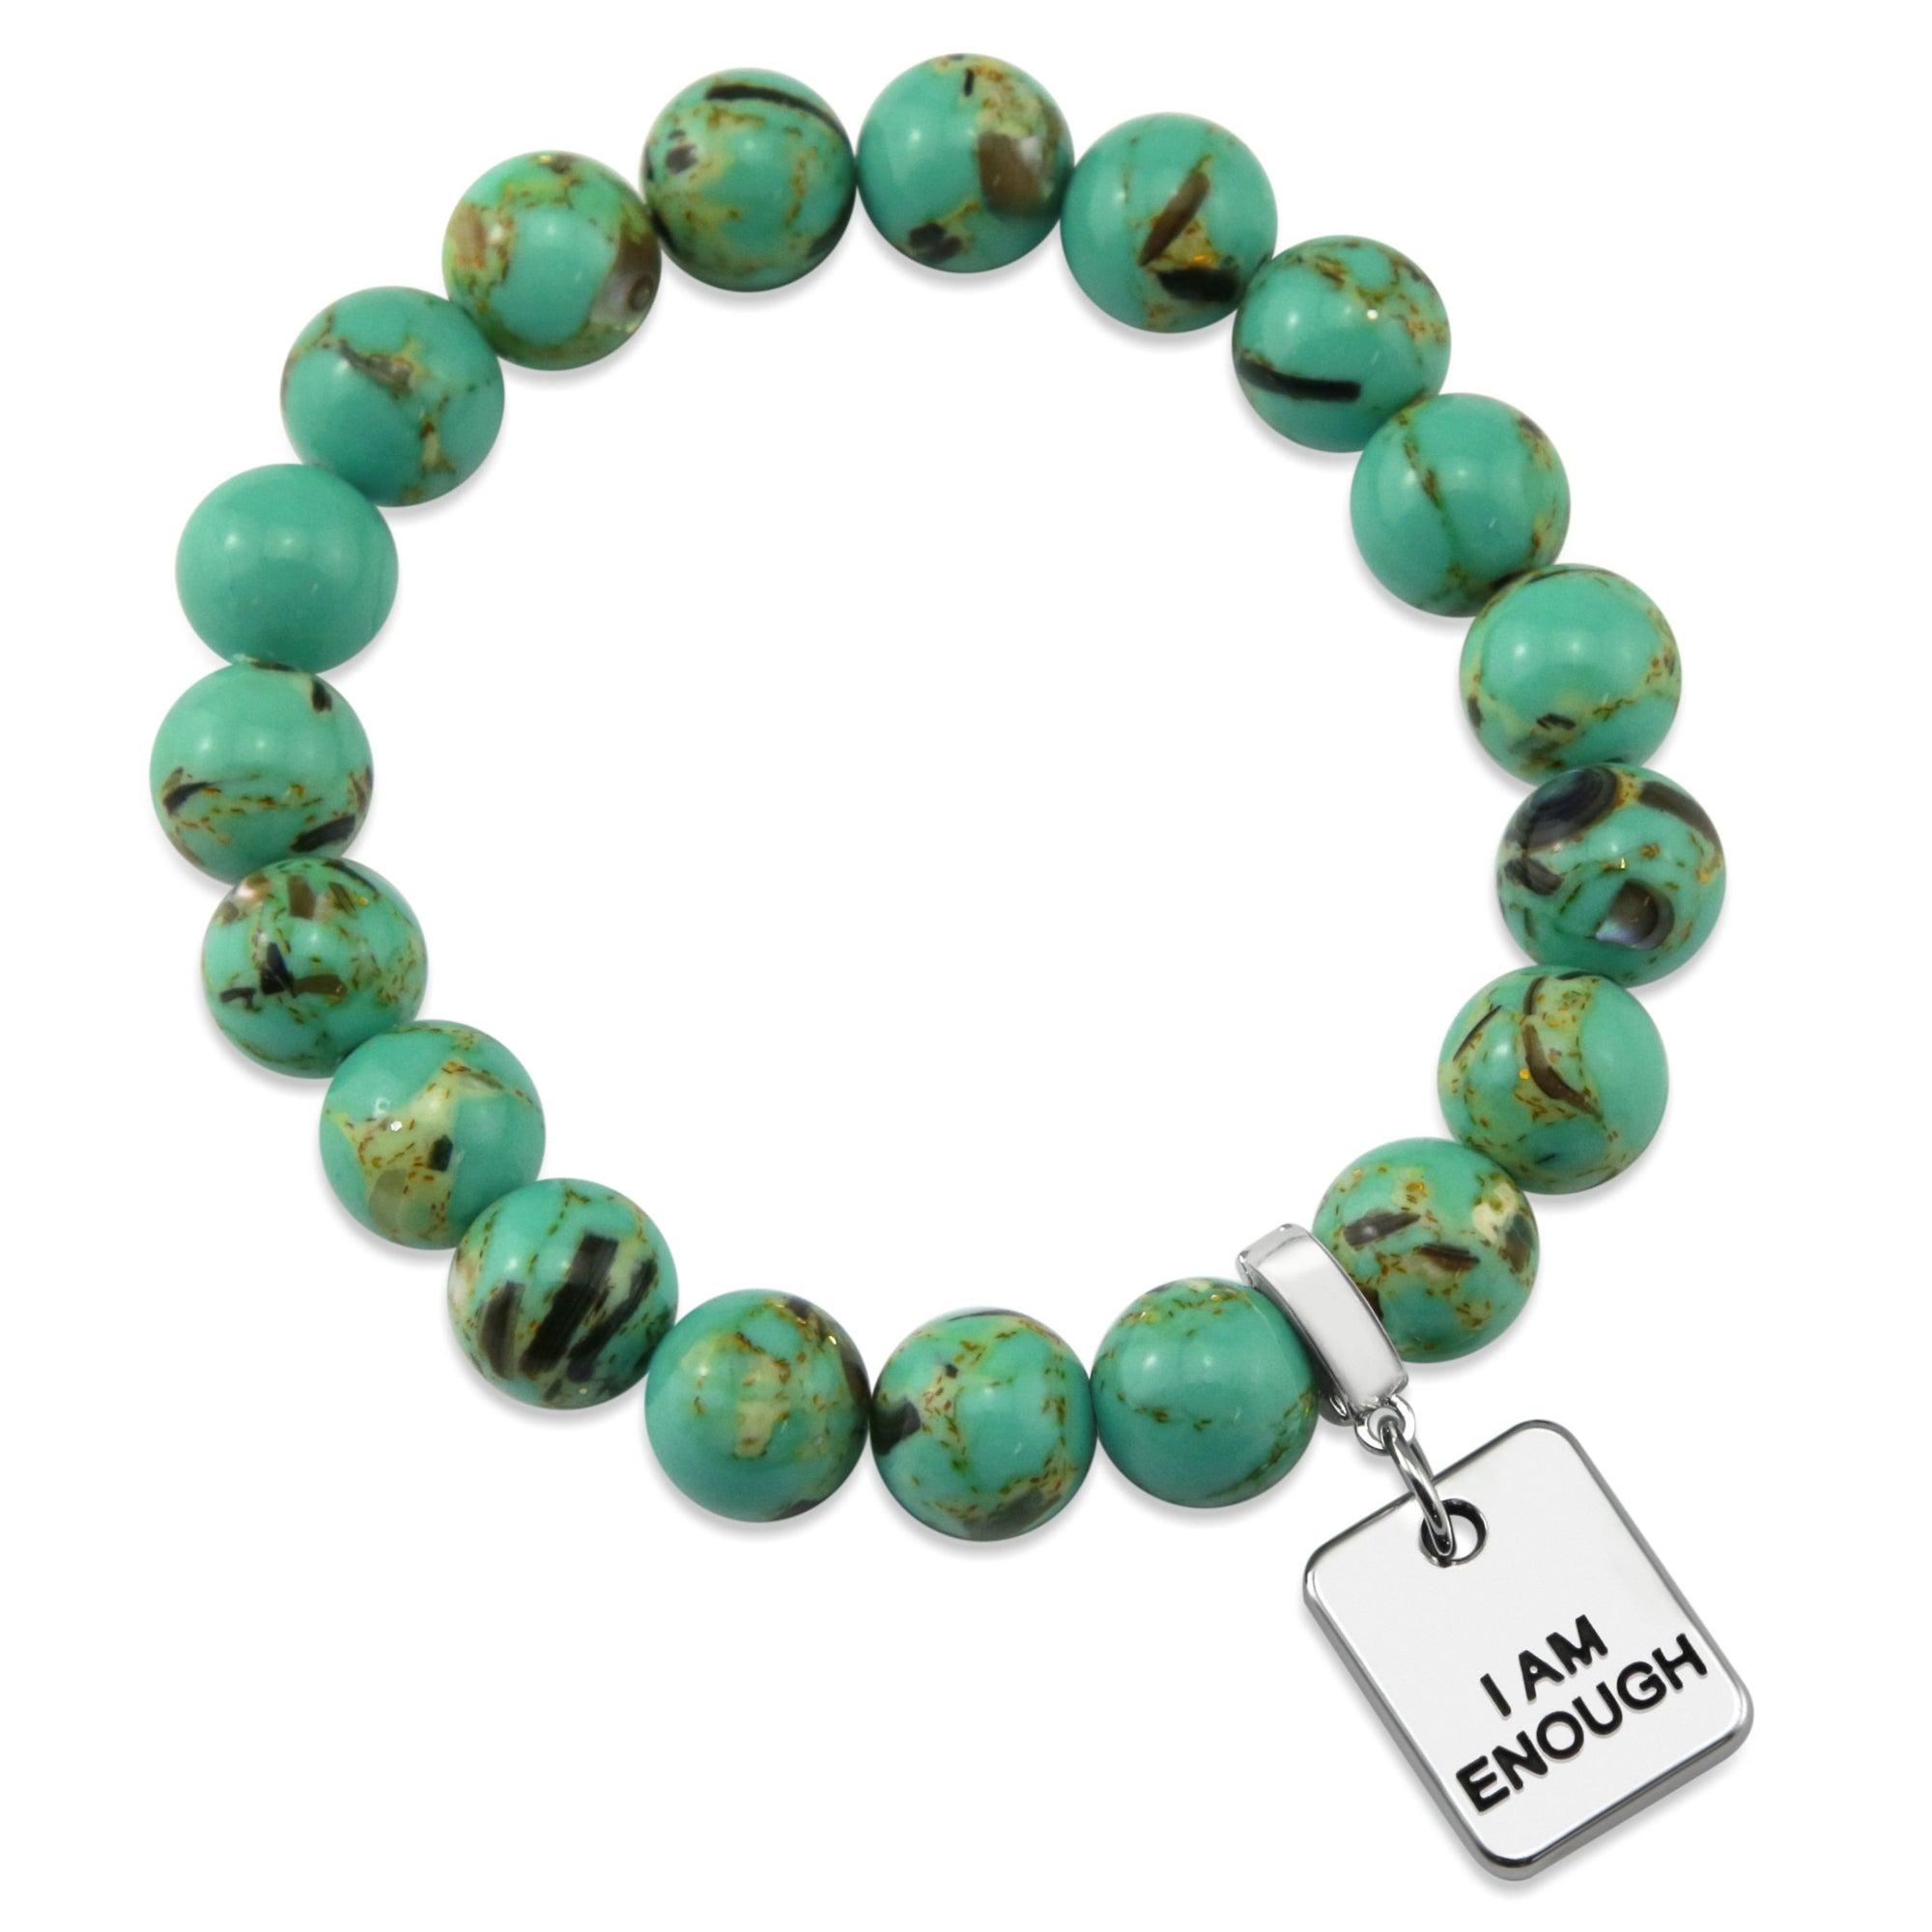 Teal coloured stone bead bracelet with meaningful word charm. 